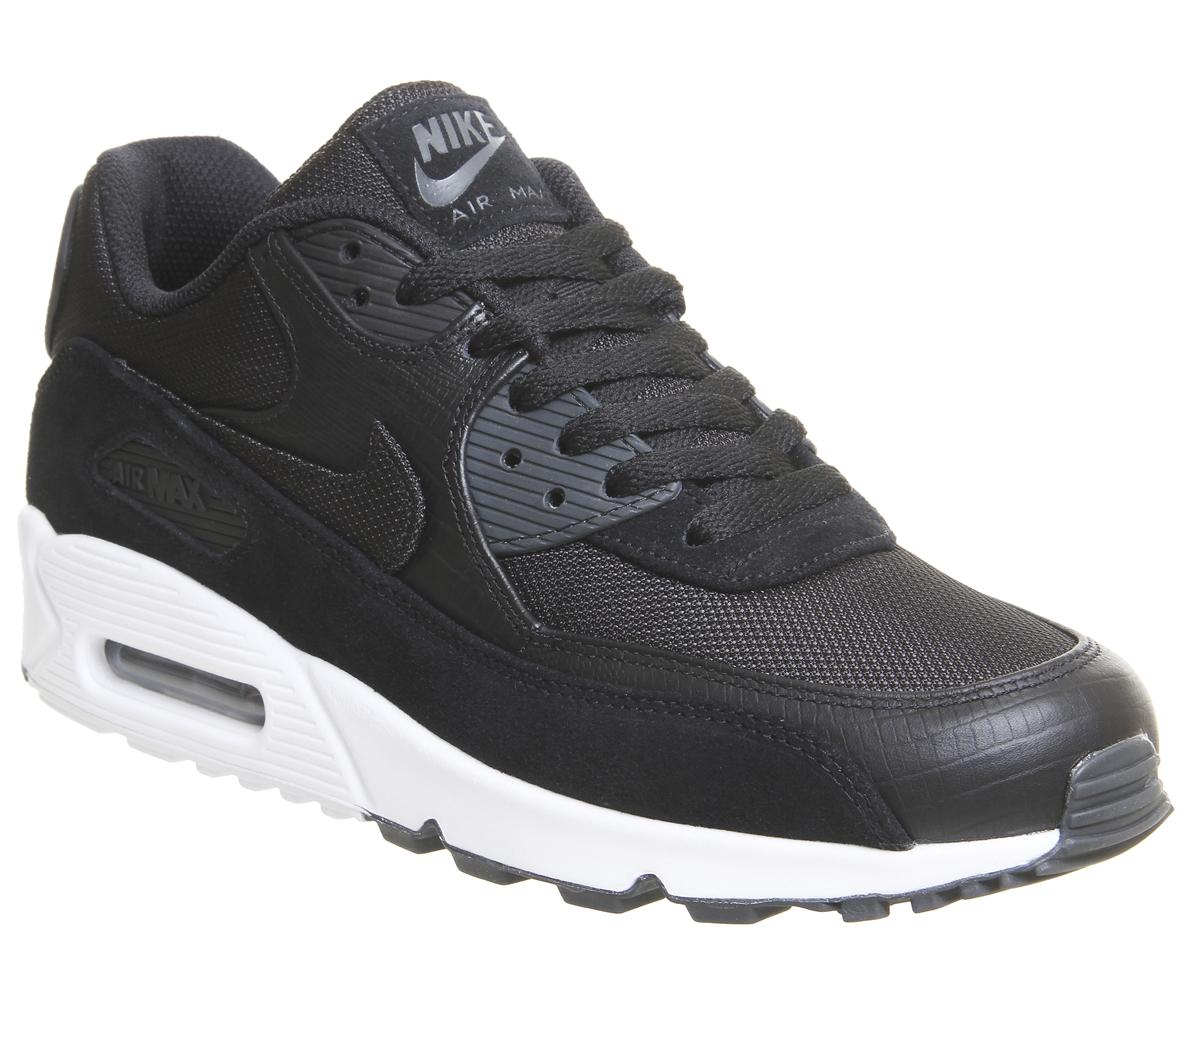 air max 90 trainers anthracite white black